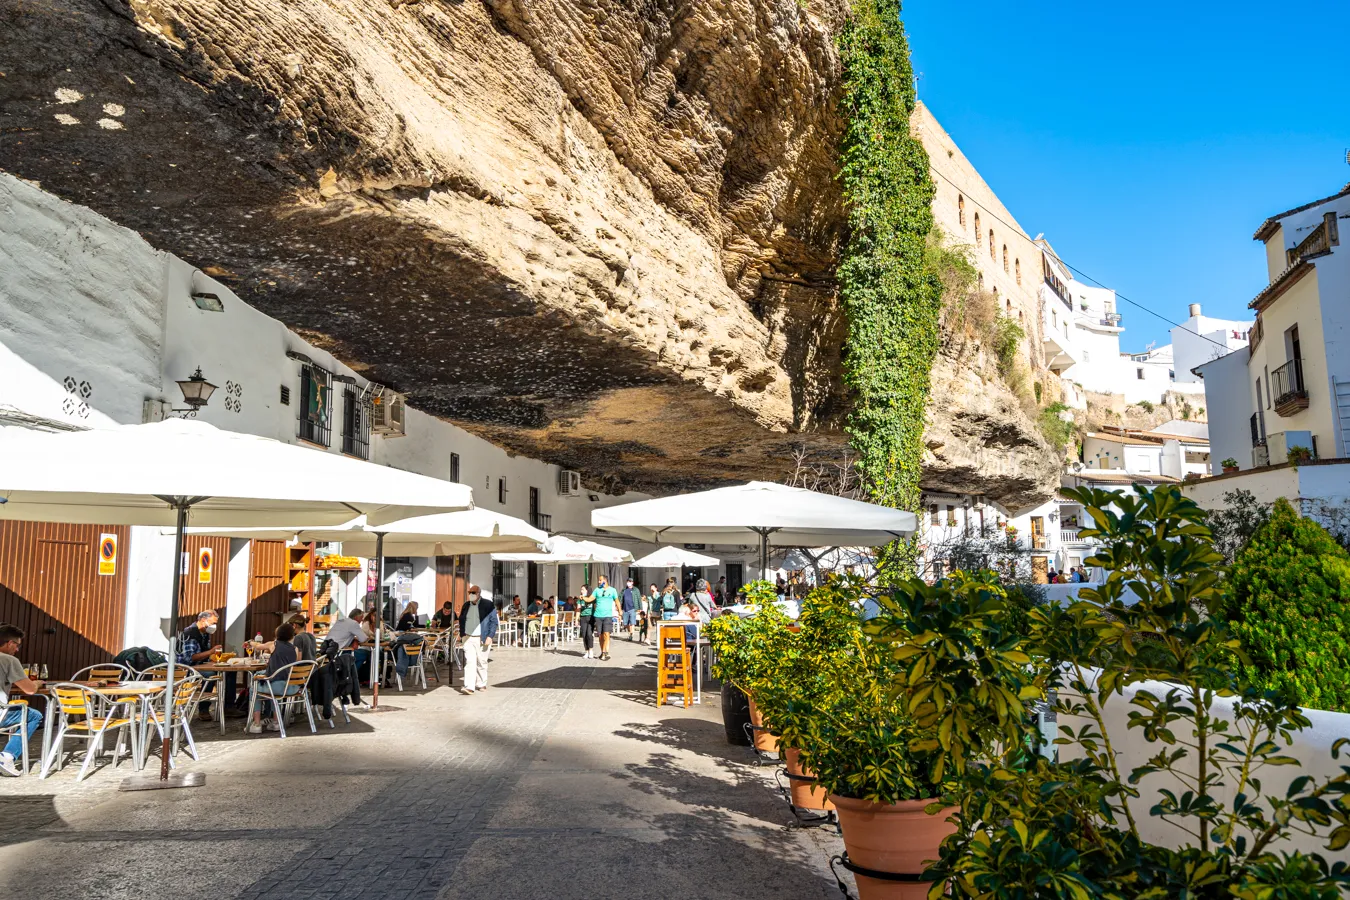 view of whitewashed buildings under a rocky overhang in setenil de las bodegas, one of the best day trips from seville spain